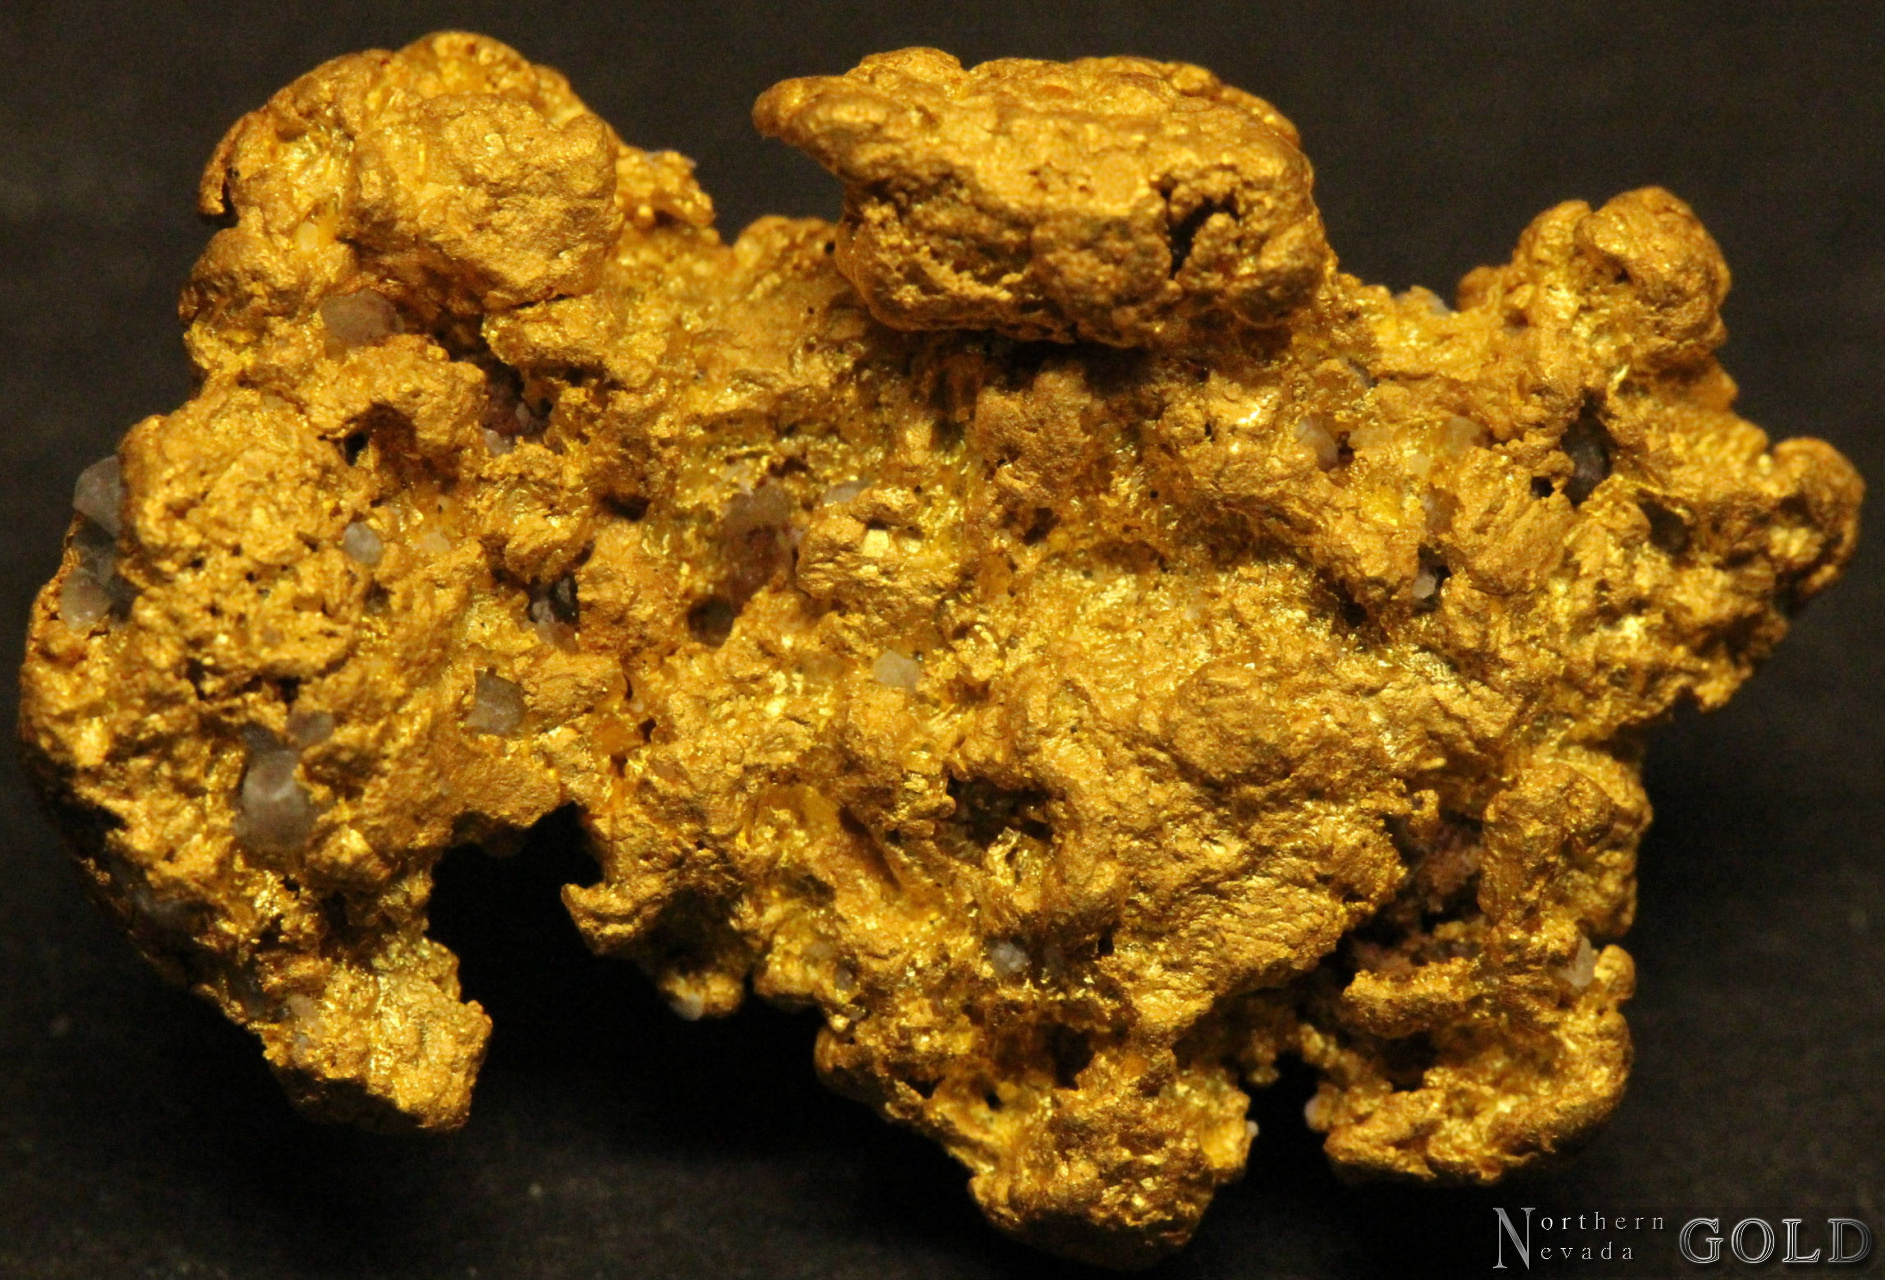 the golden nugget gold nugget